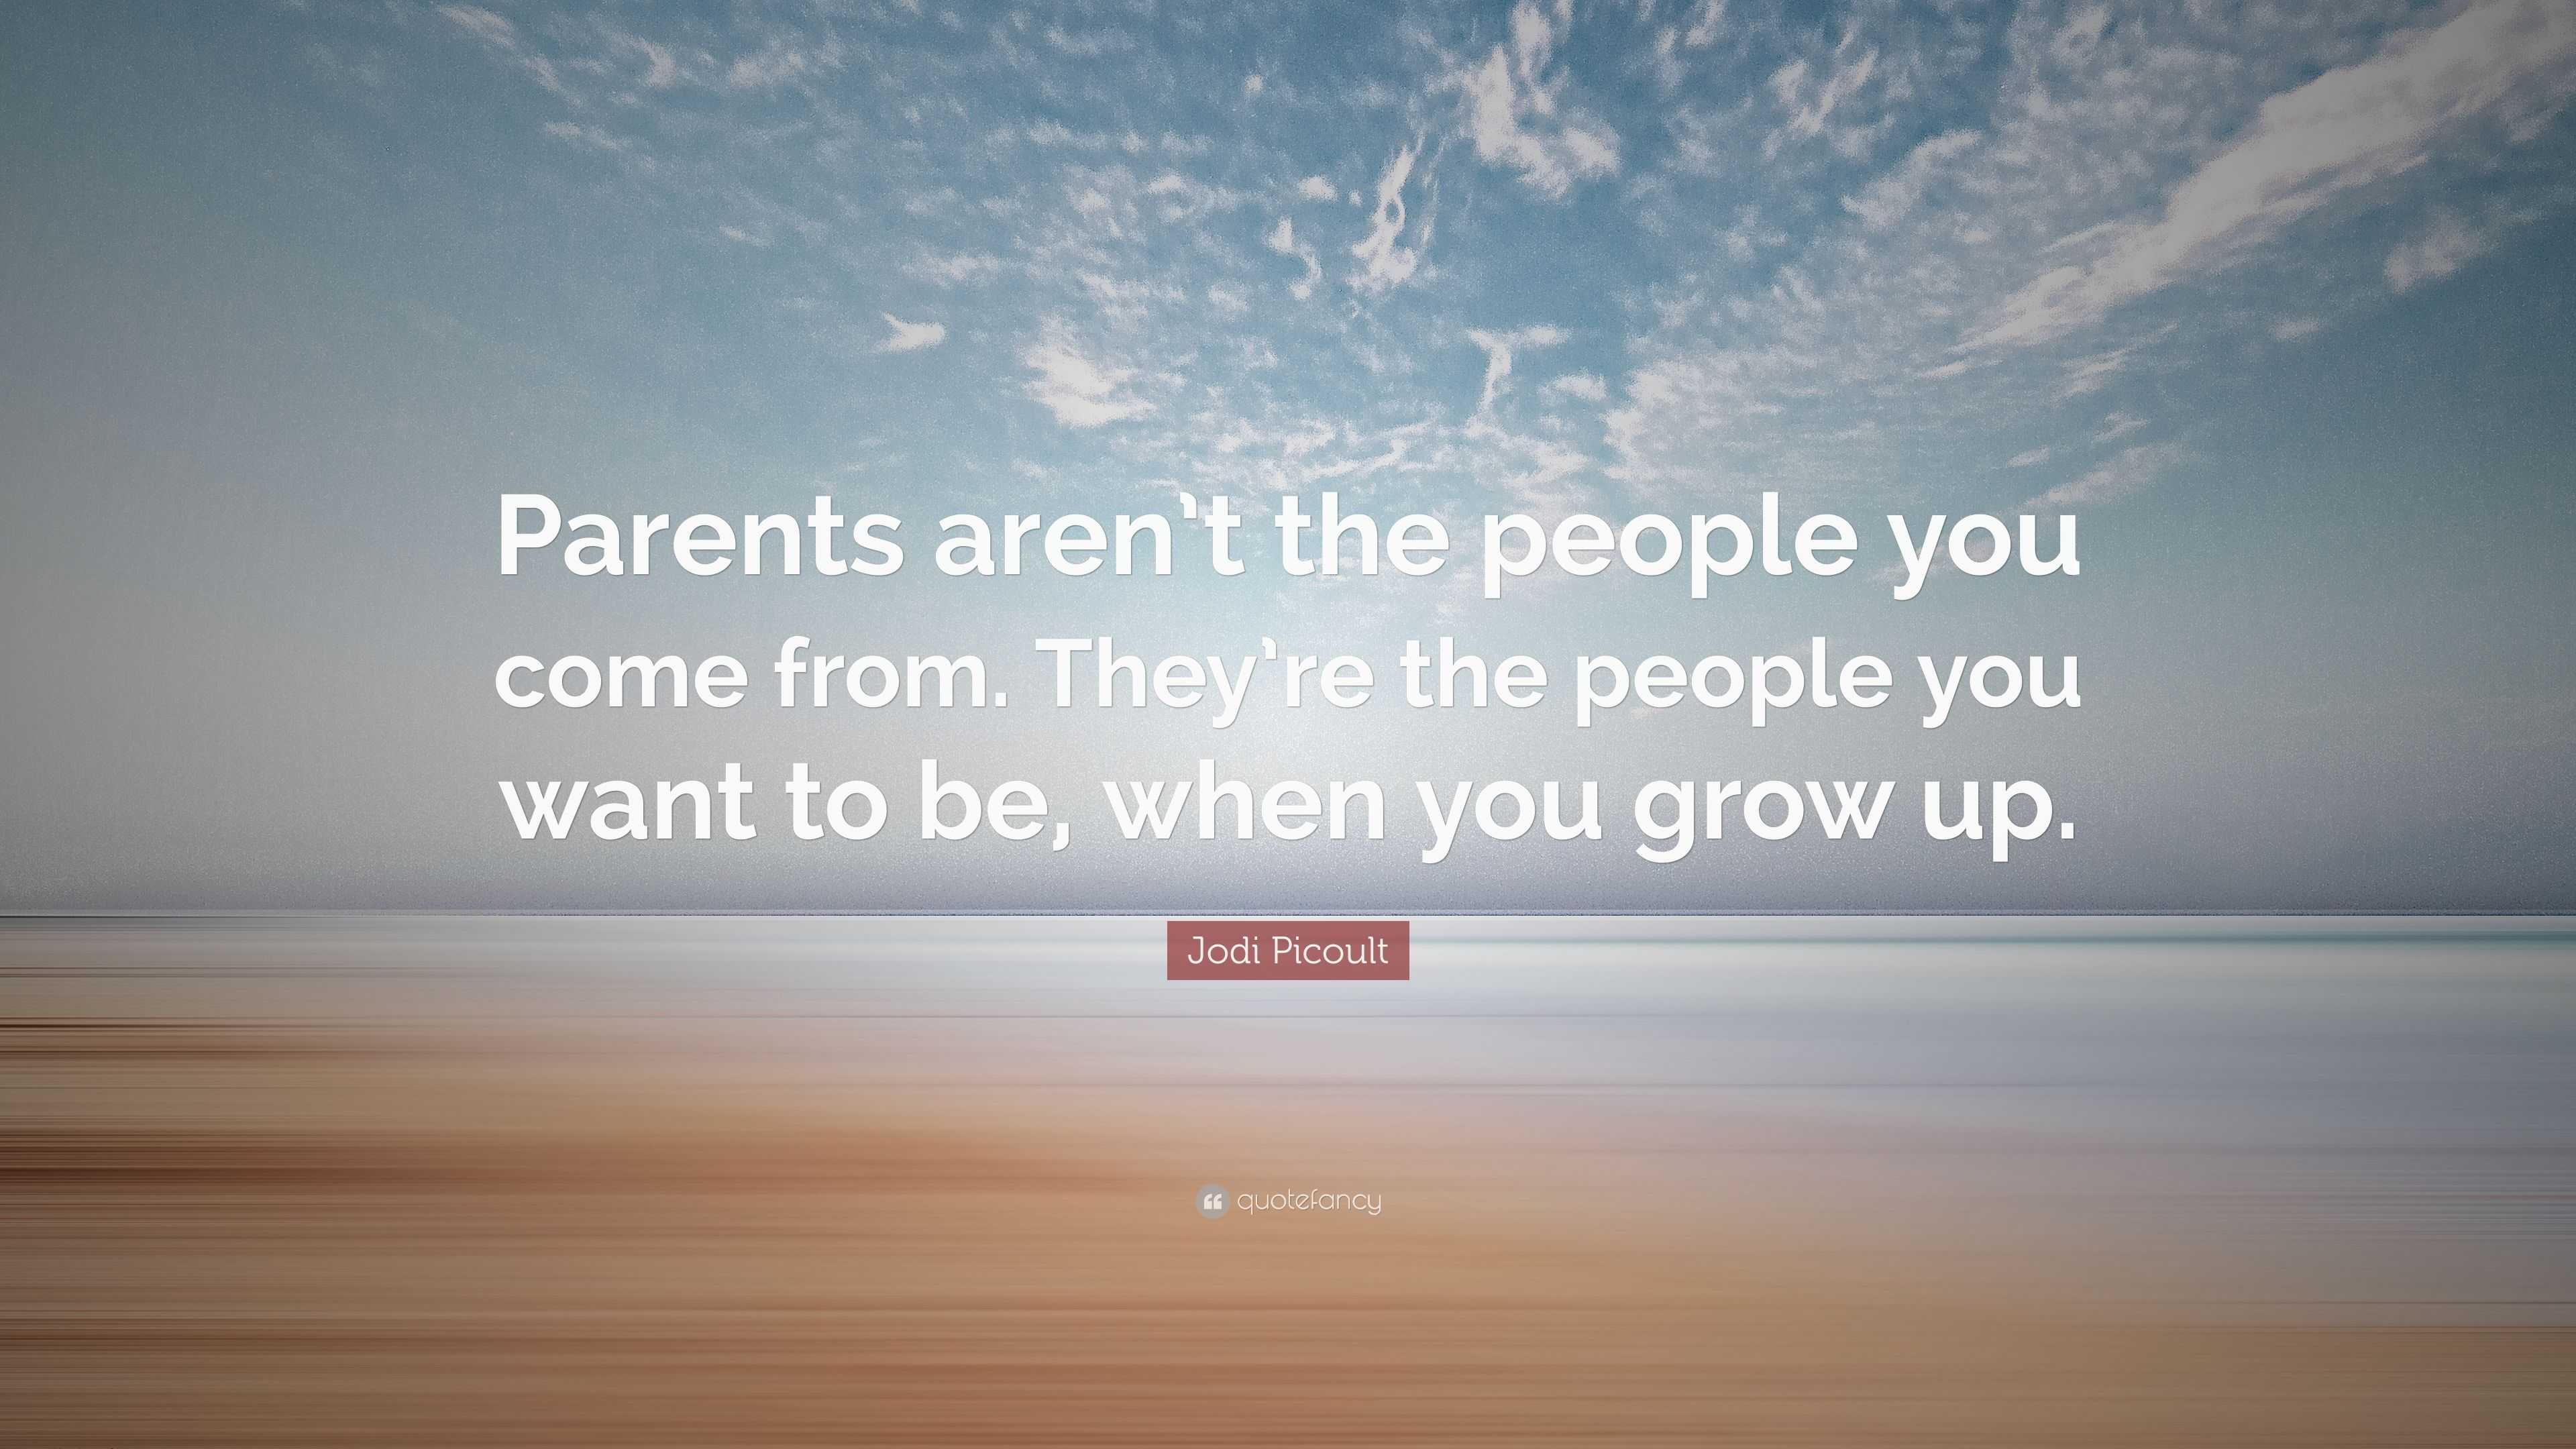 jodi picoult quotes about children growing up